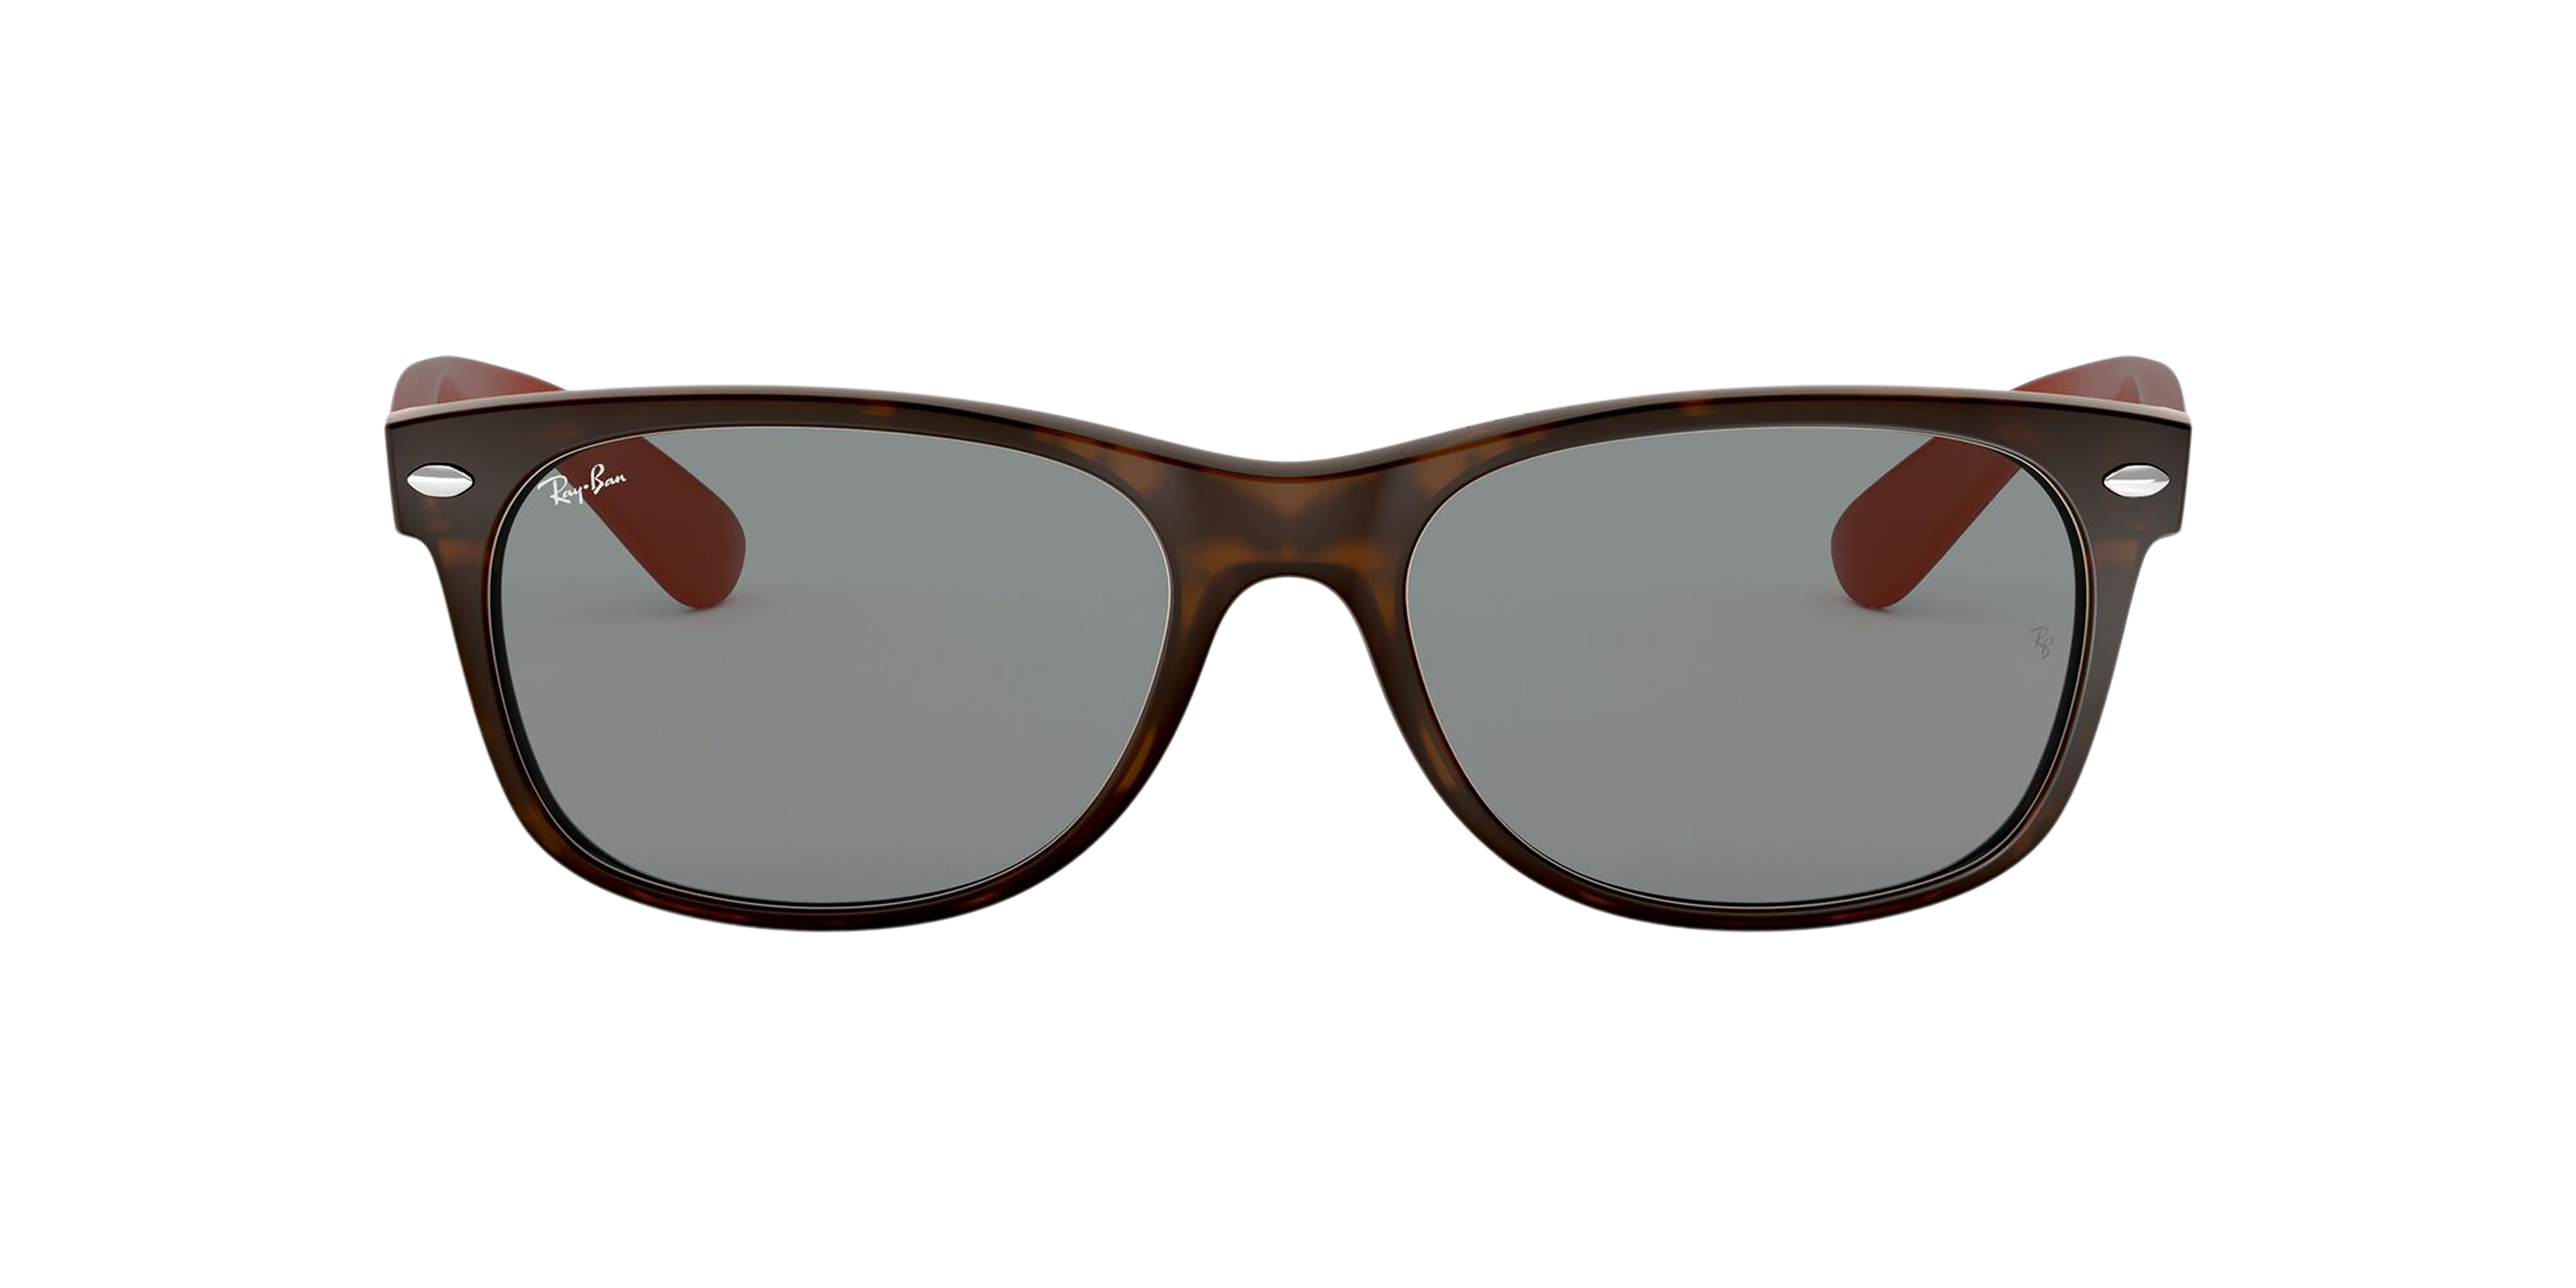 [products.image.front] Ray-Ban New Wayfarer Bicolor RB2132 6180R5